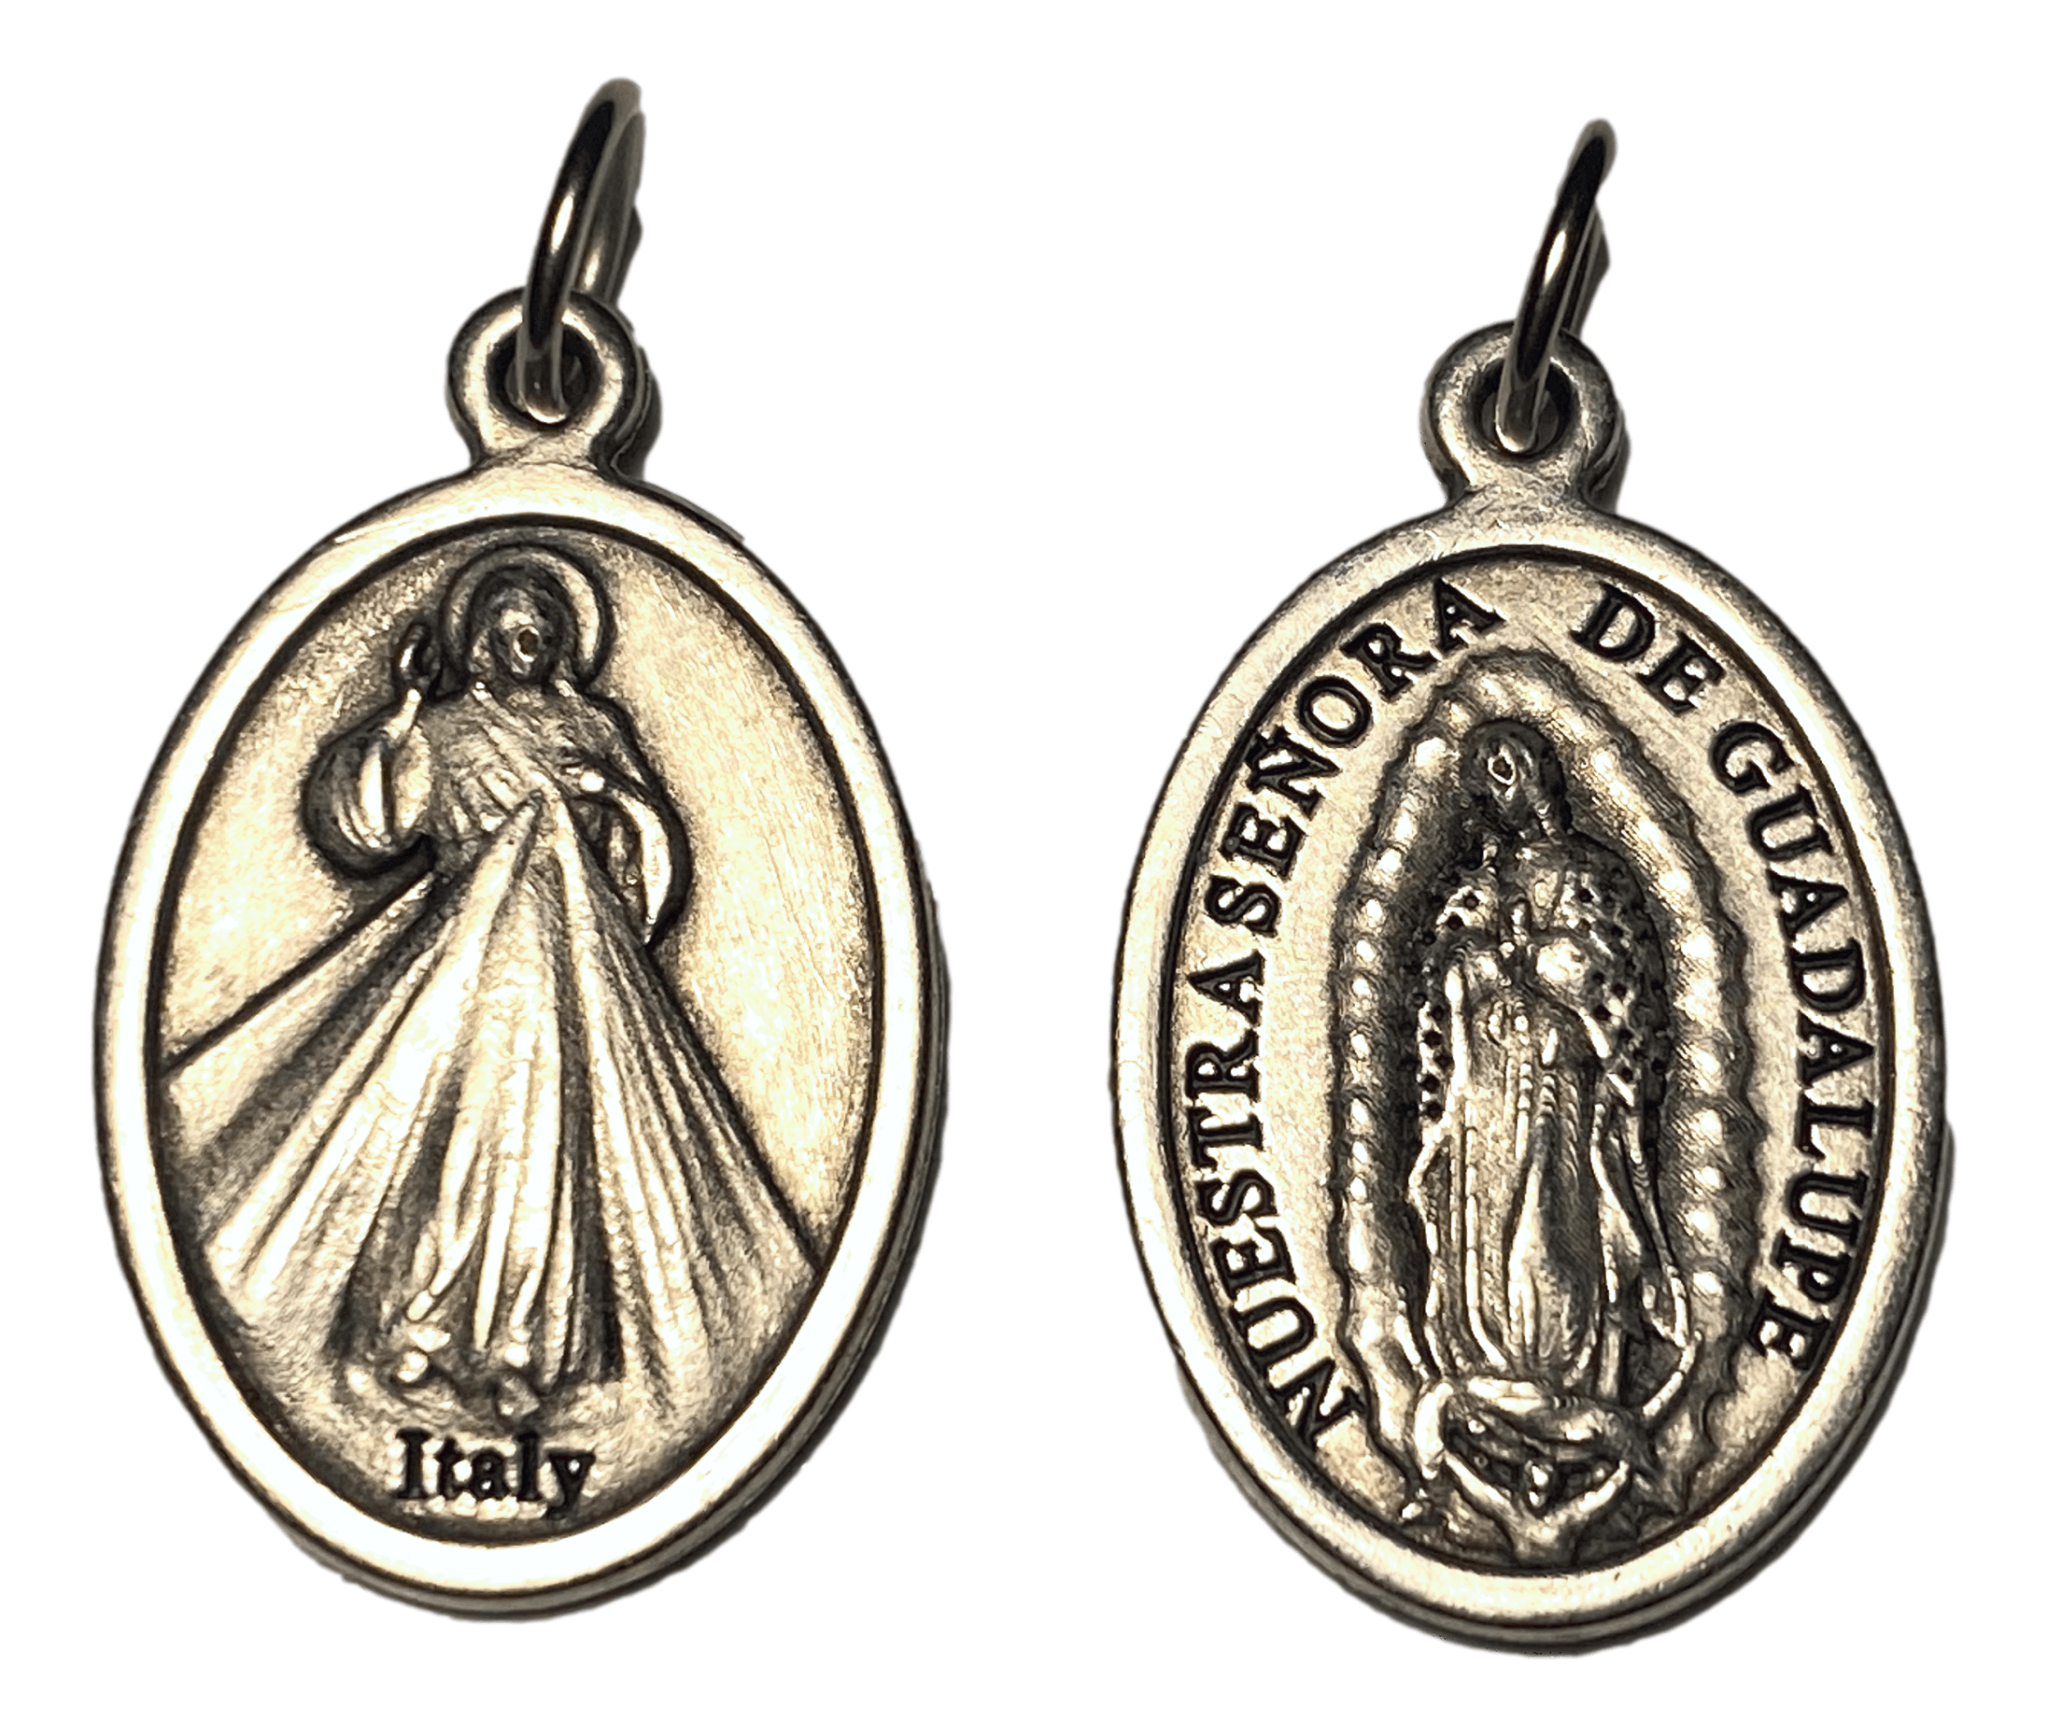 Medal Oval Our Lady of Guadalupe Divine Mercy Italian Double-Sided Silver Metal Alloy 1 L x 5/8 W inches - Ysleta Mission Gift Shop- VOTED El Paso's Best Gift Shop